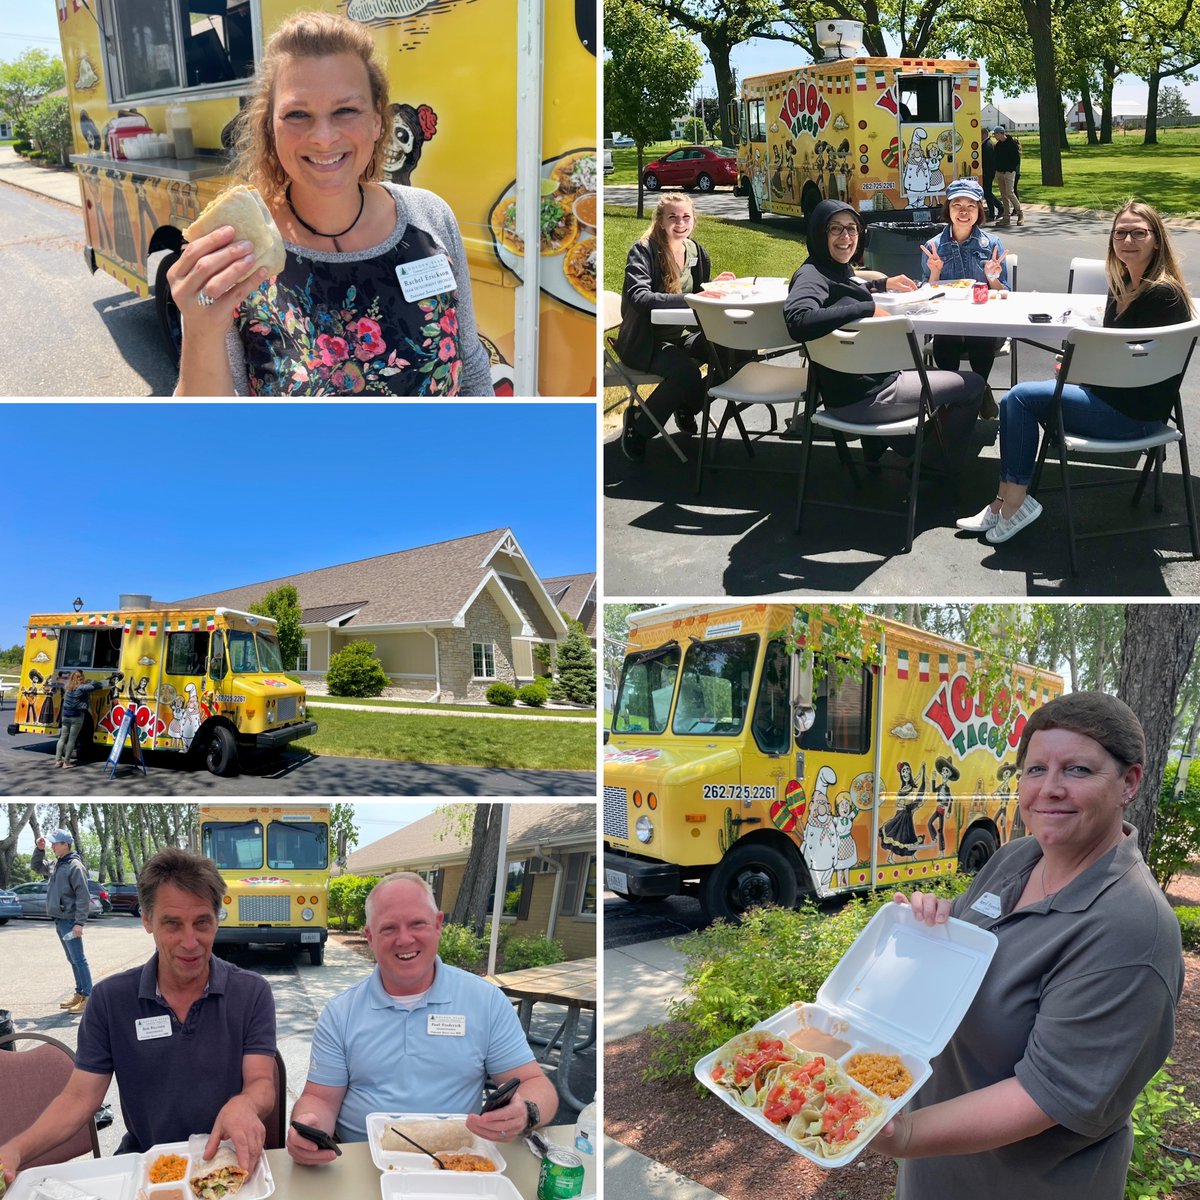 There is no such thing as a free lunch...unless you're a Golden Years employee and we bring the Yojo's taco truck to visit! #loveourstaff